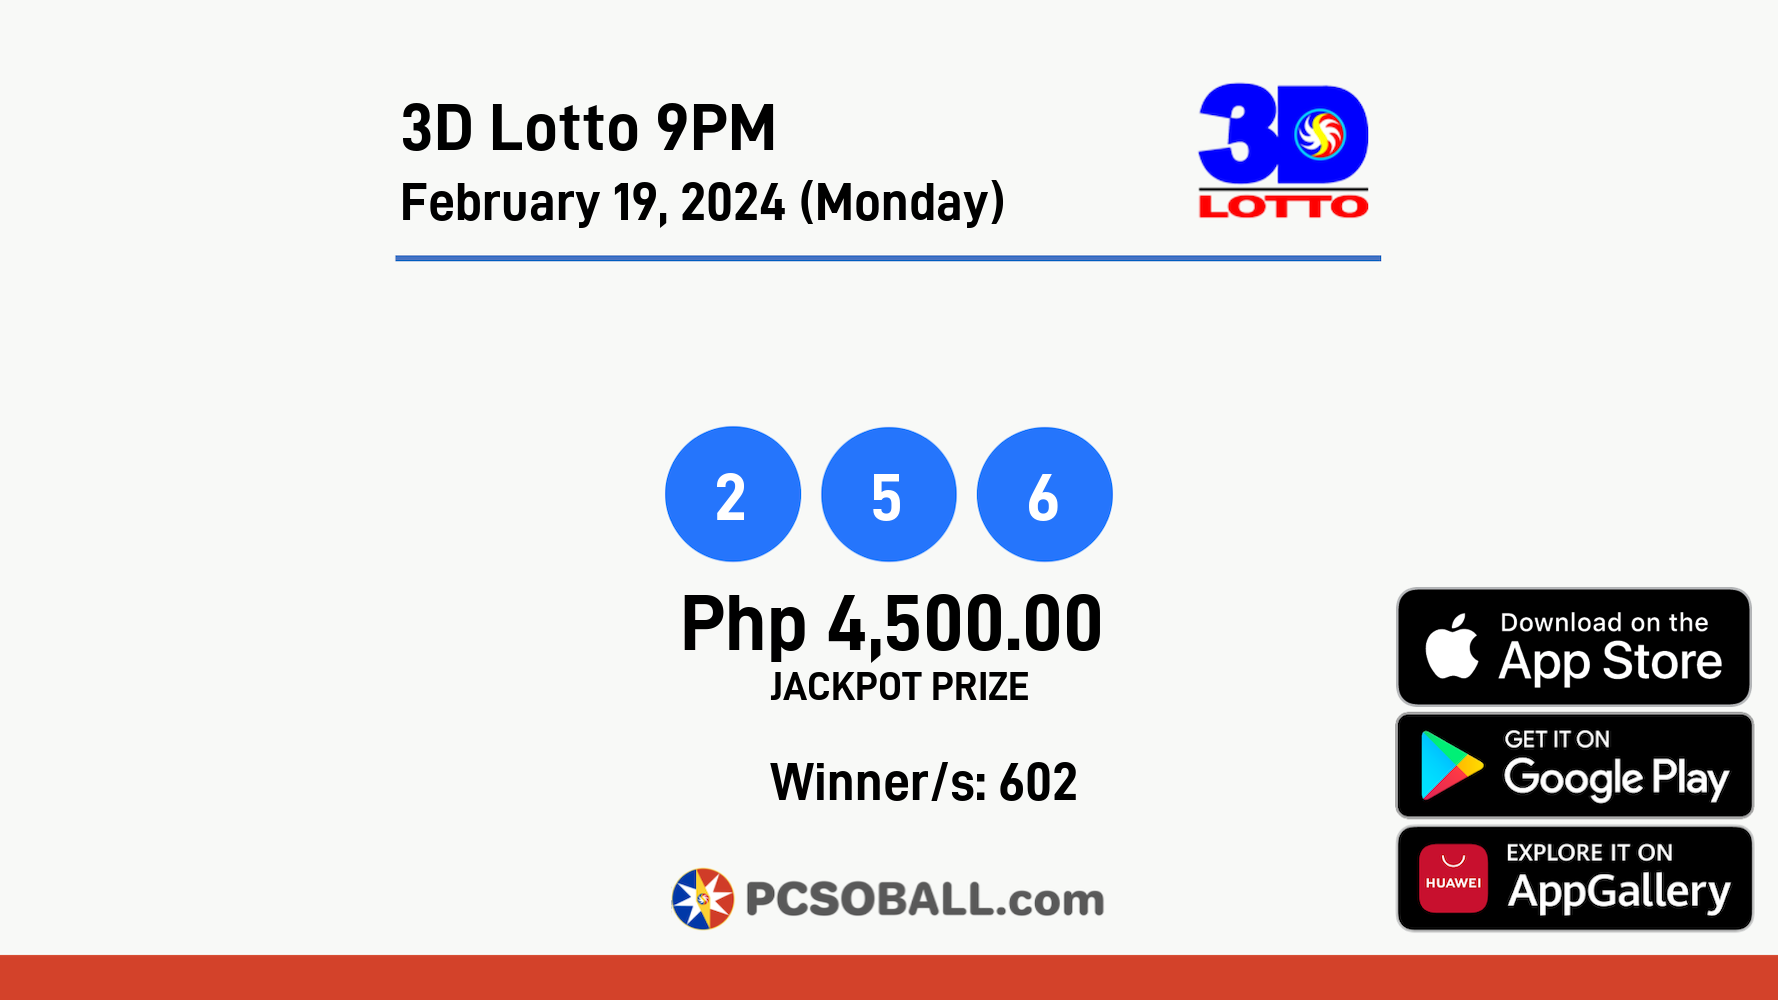 3D Lotto 9PM February 19, 2024 (Monday) Result